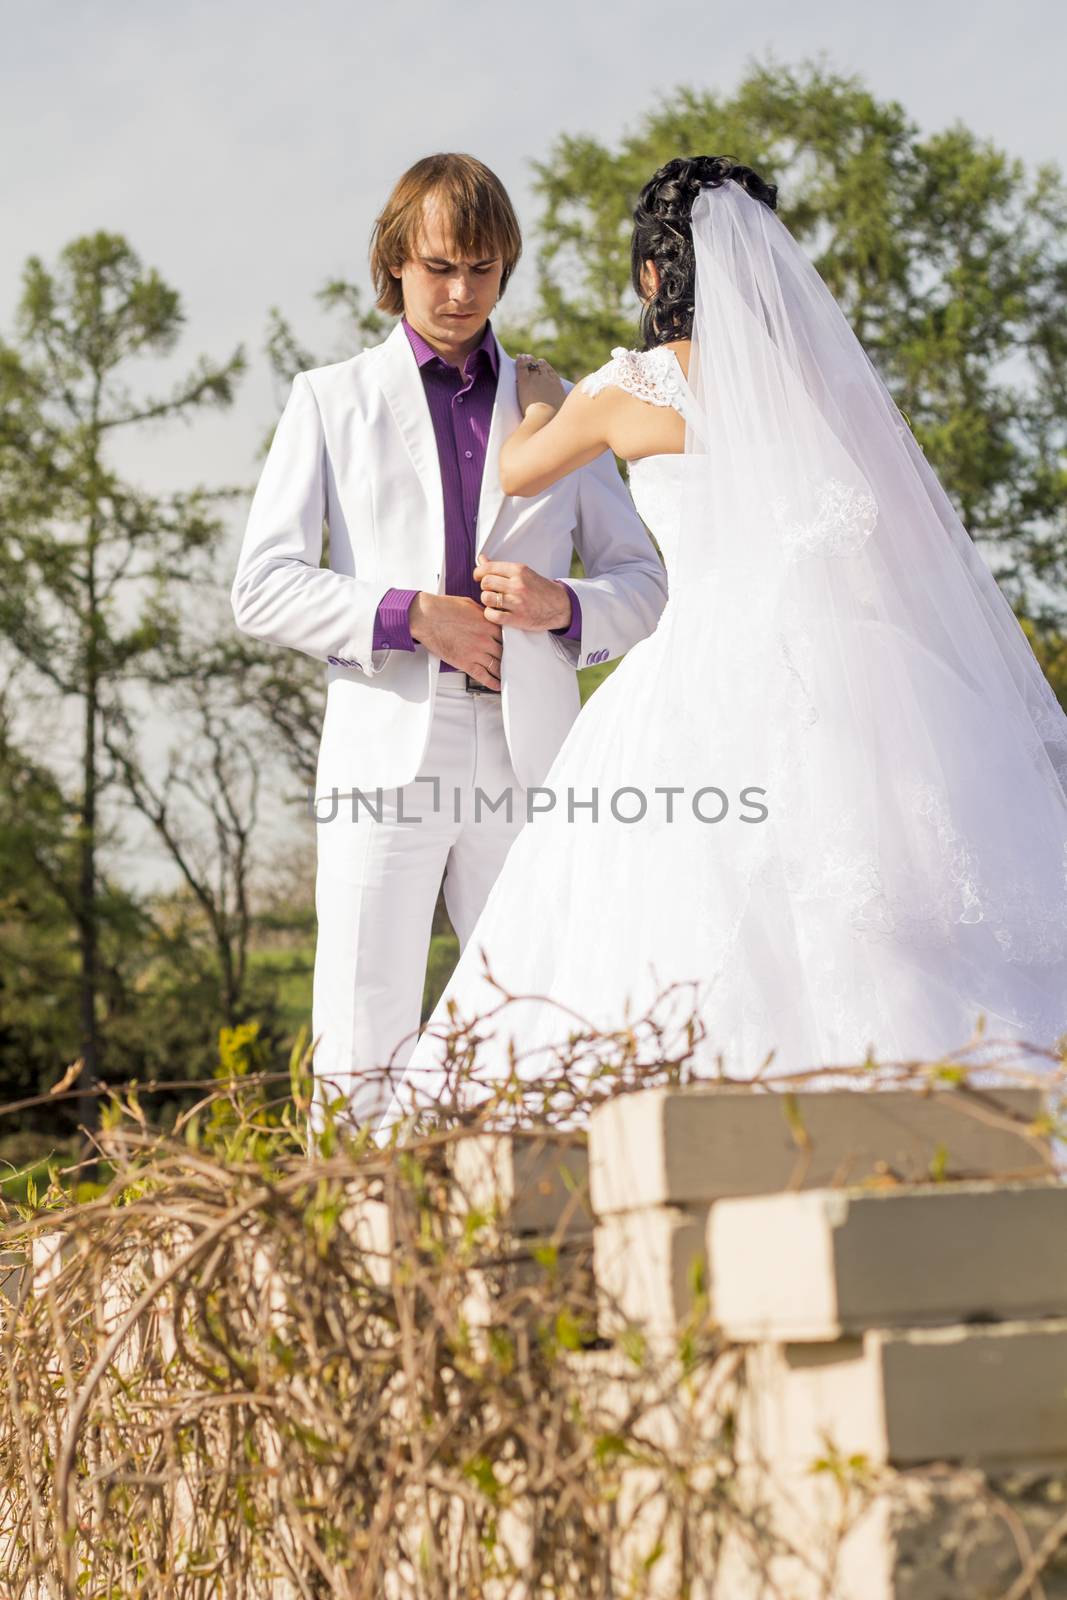 Bride calms the angry groom. For your commercial and editorial use.